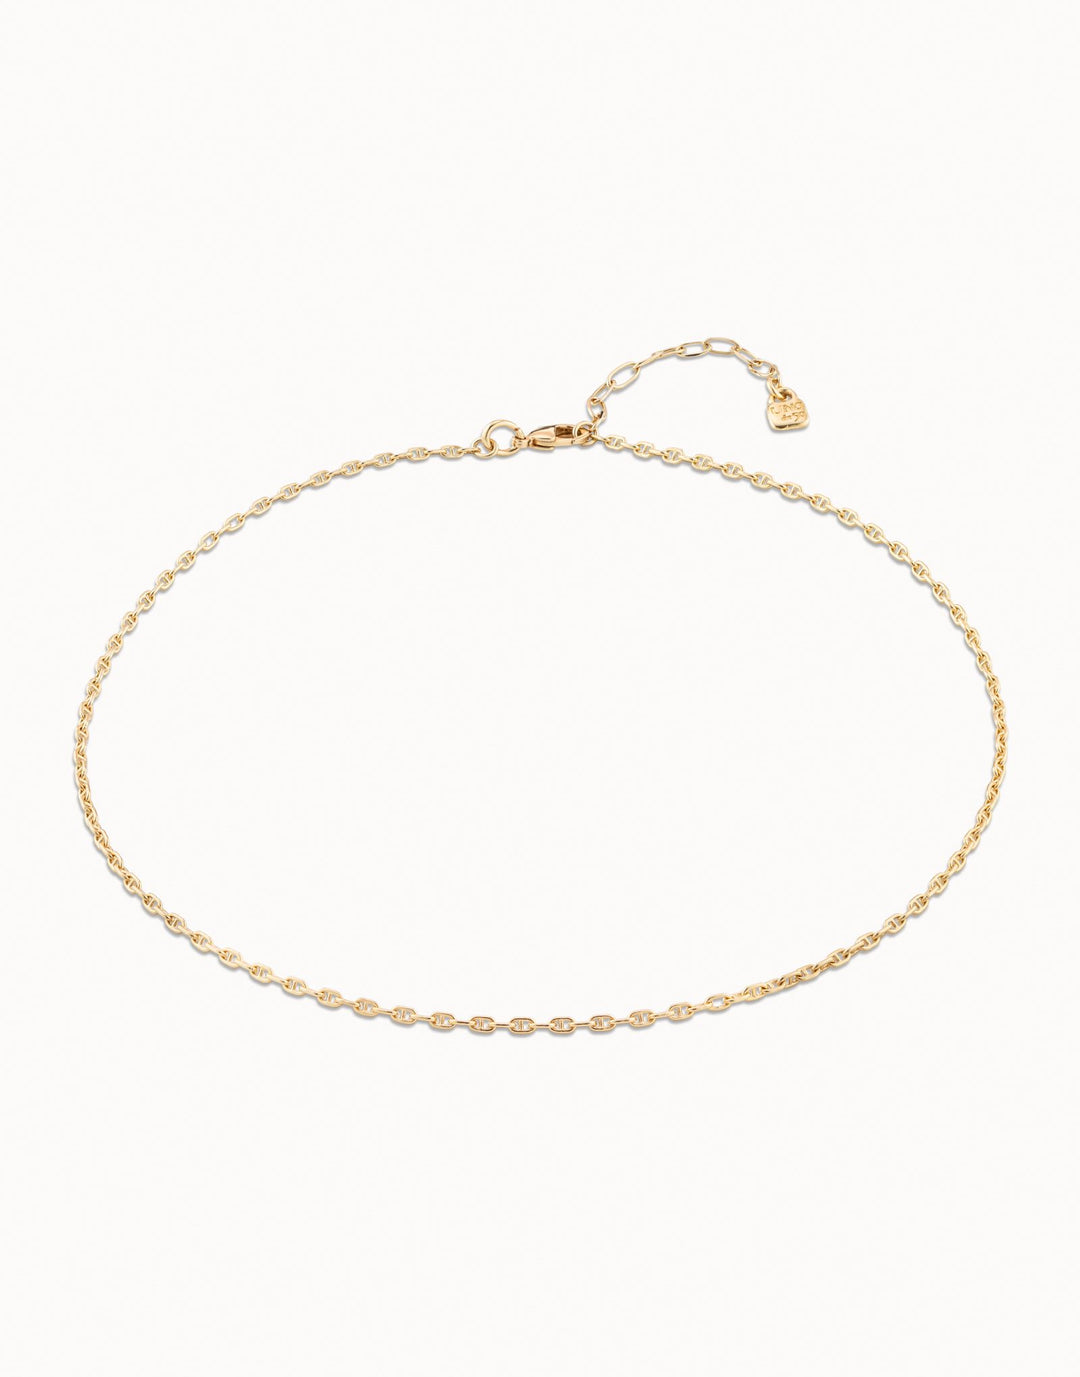 Cadema 5 Necklace - Kingfisher Road - Online Boutique